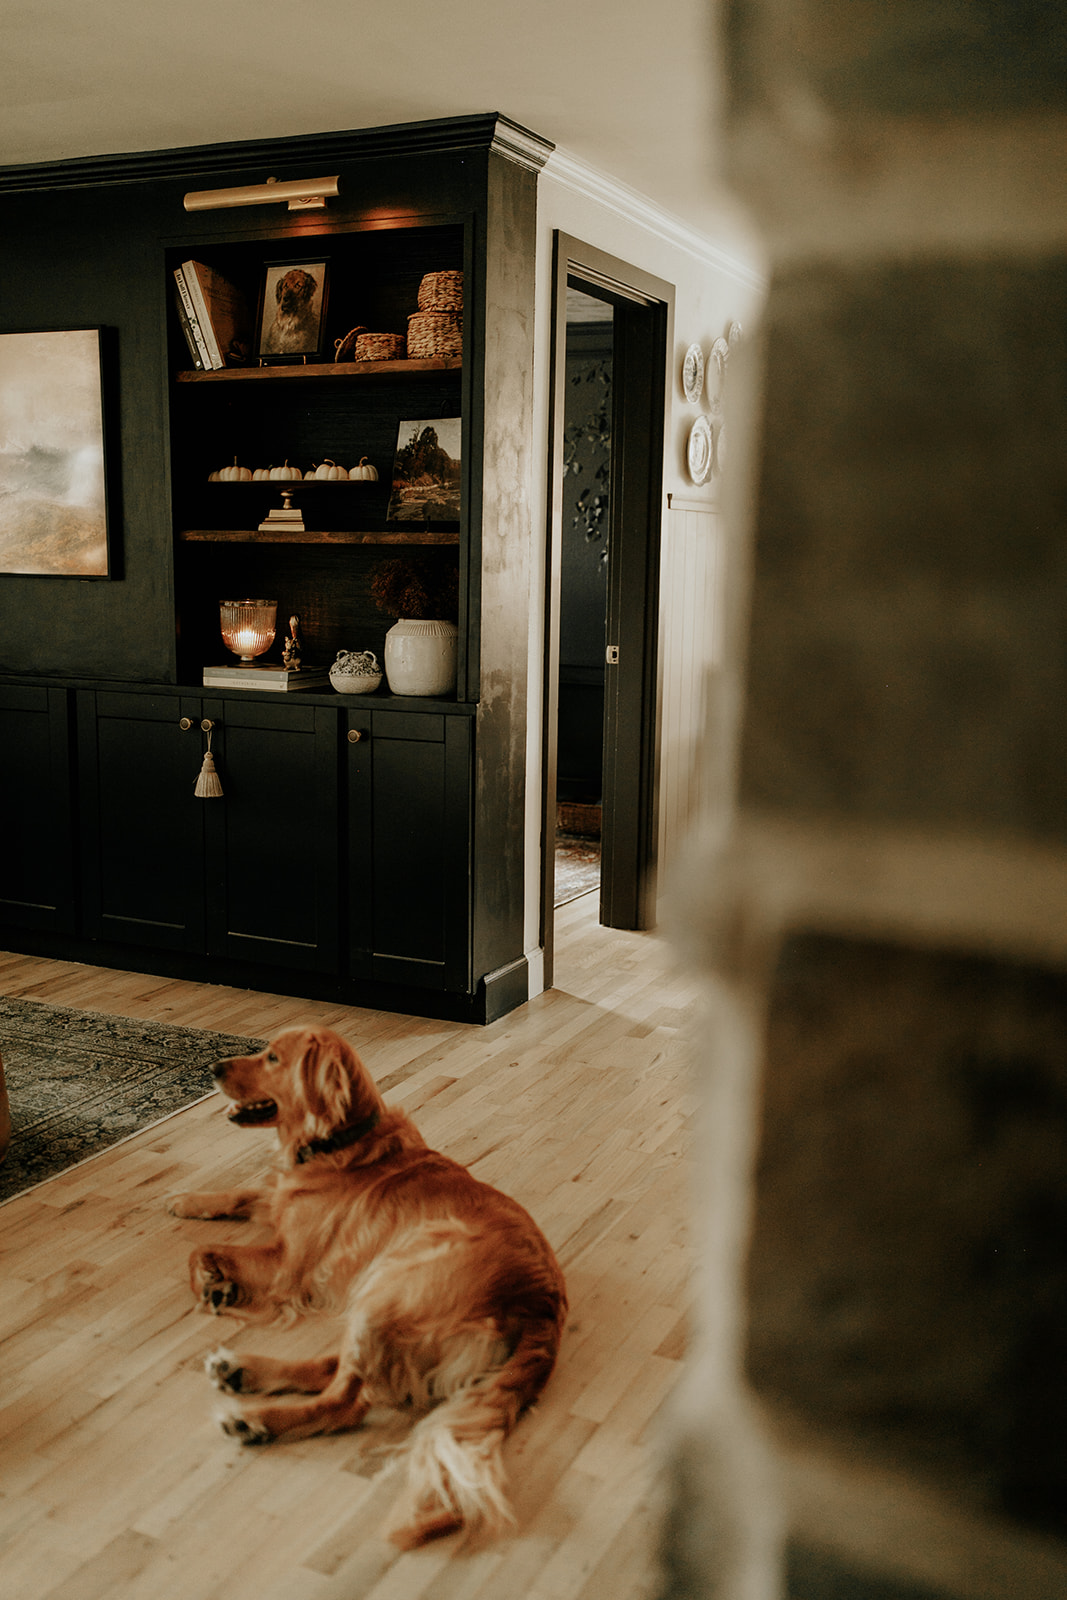 A dog lays on real hardwood floors, next to a vintage rug and in front of built in cabinets with well decorated shelves.